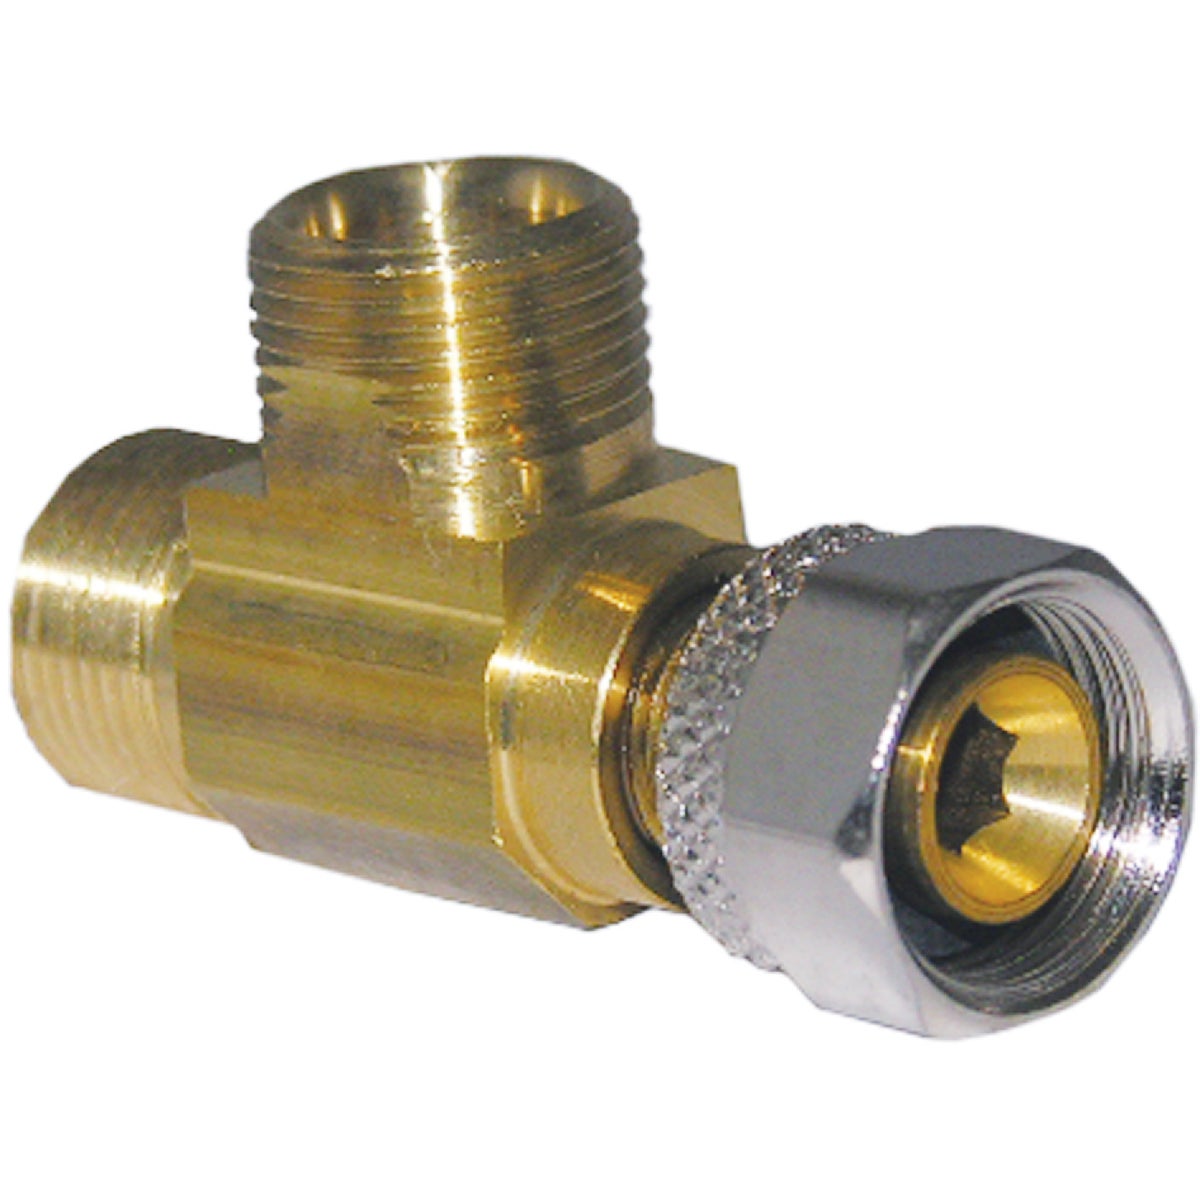 Lasco 3/8 In. FC Inlet x 3/8 In.C Outlet x 3/8 In.C Outlet Brass Extender Tee